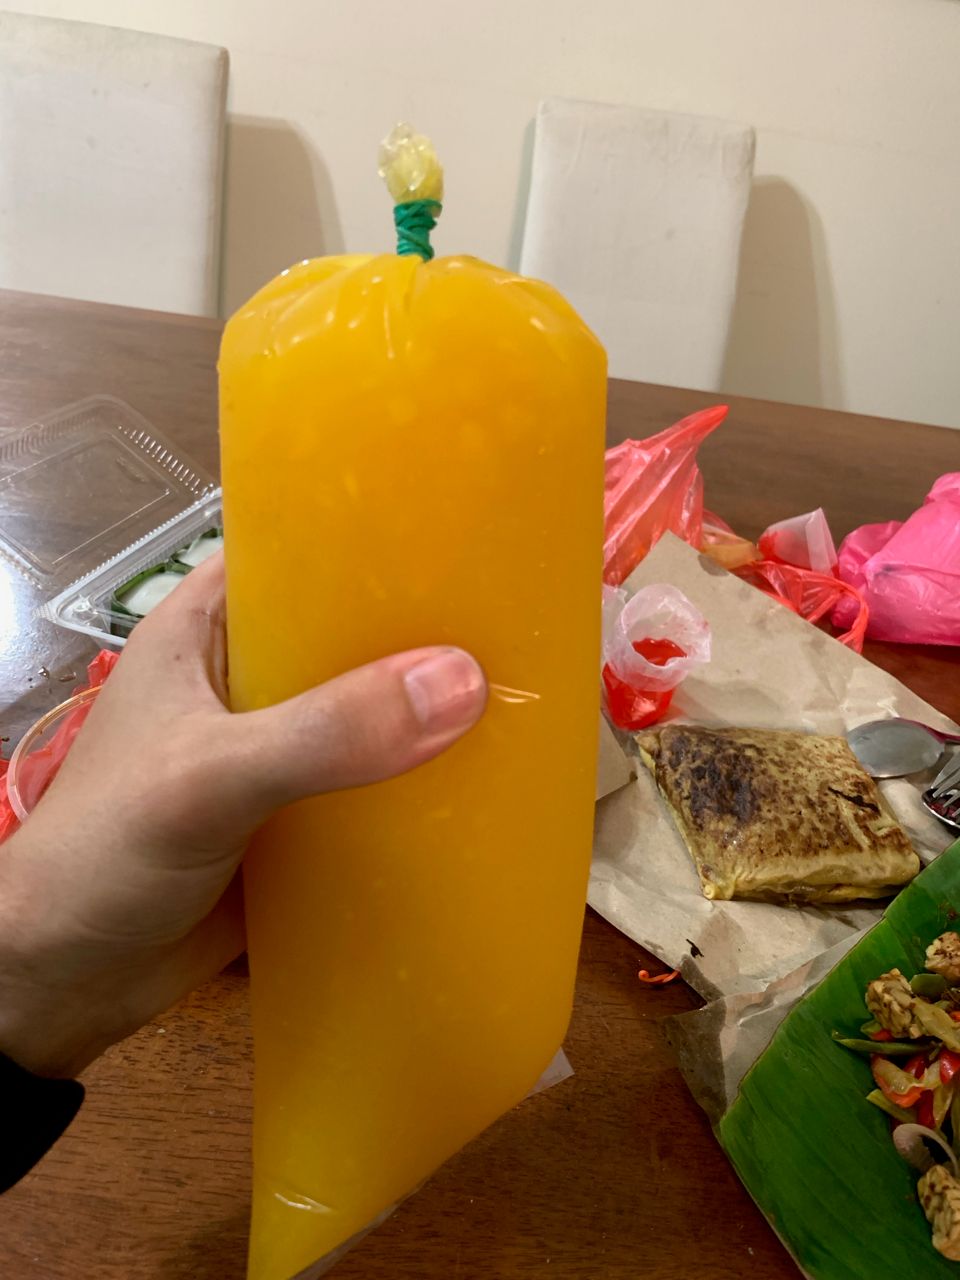 Some fresh mango drink which came in a bag, turns out it’s a bit trickier to drink than I originally thought